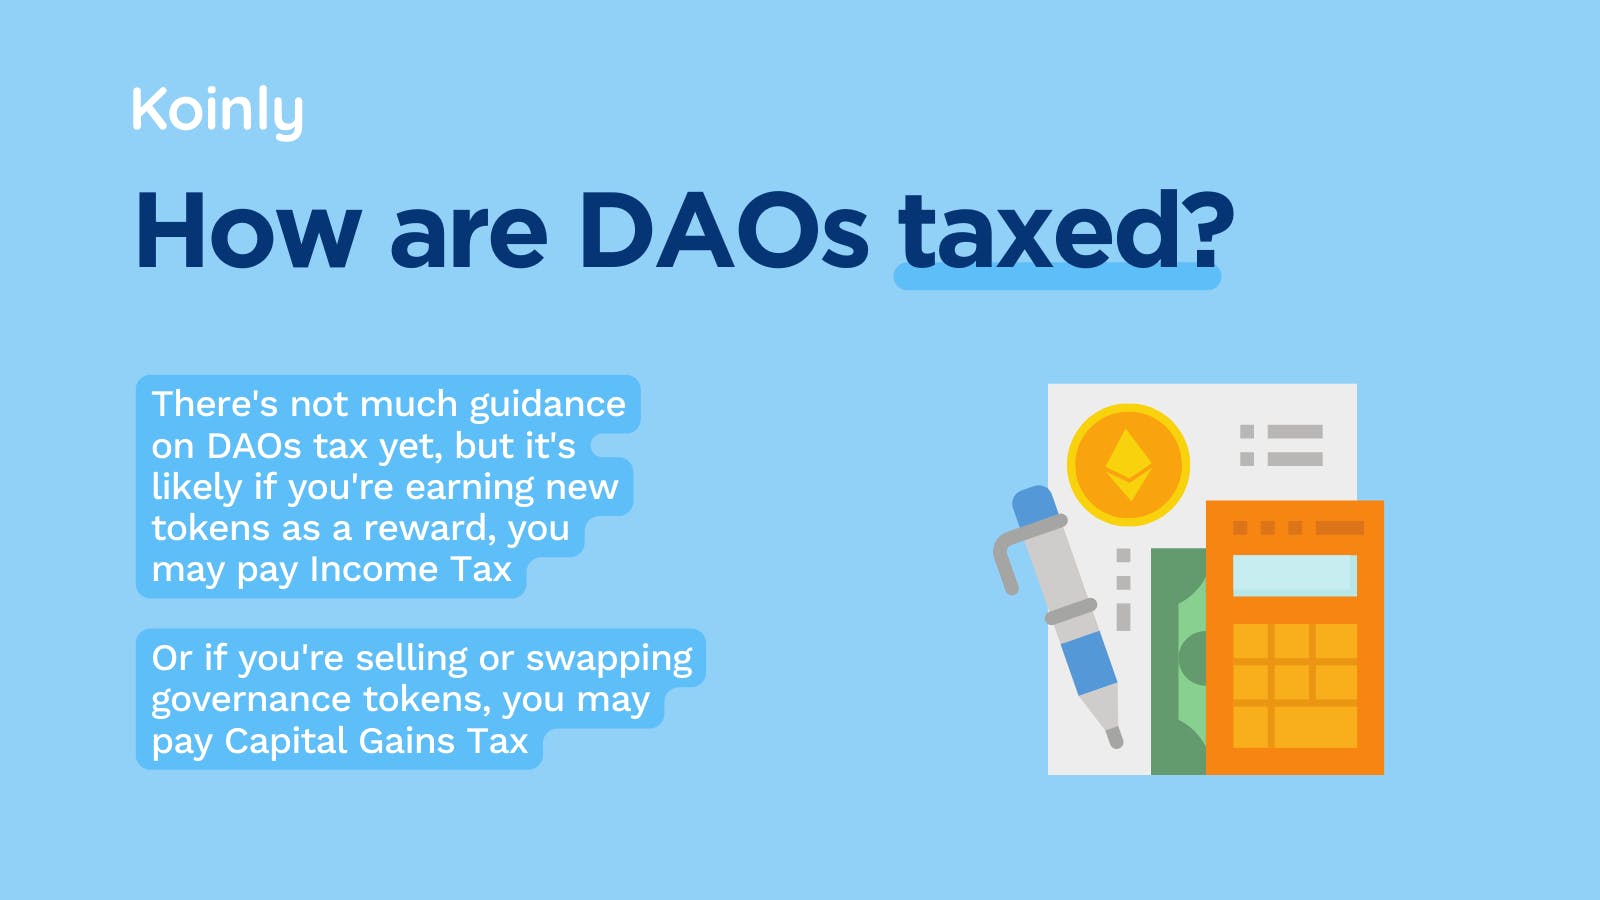 how are DAOs taxed?